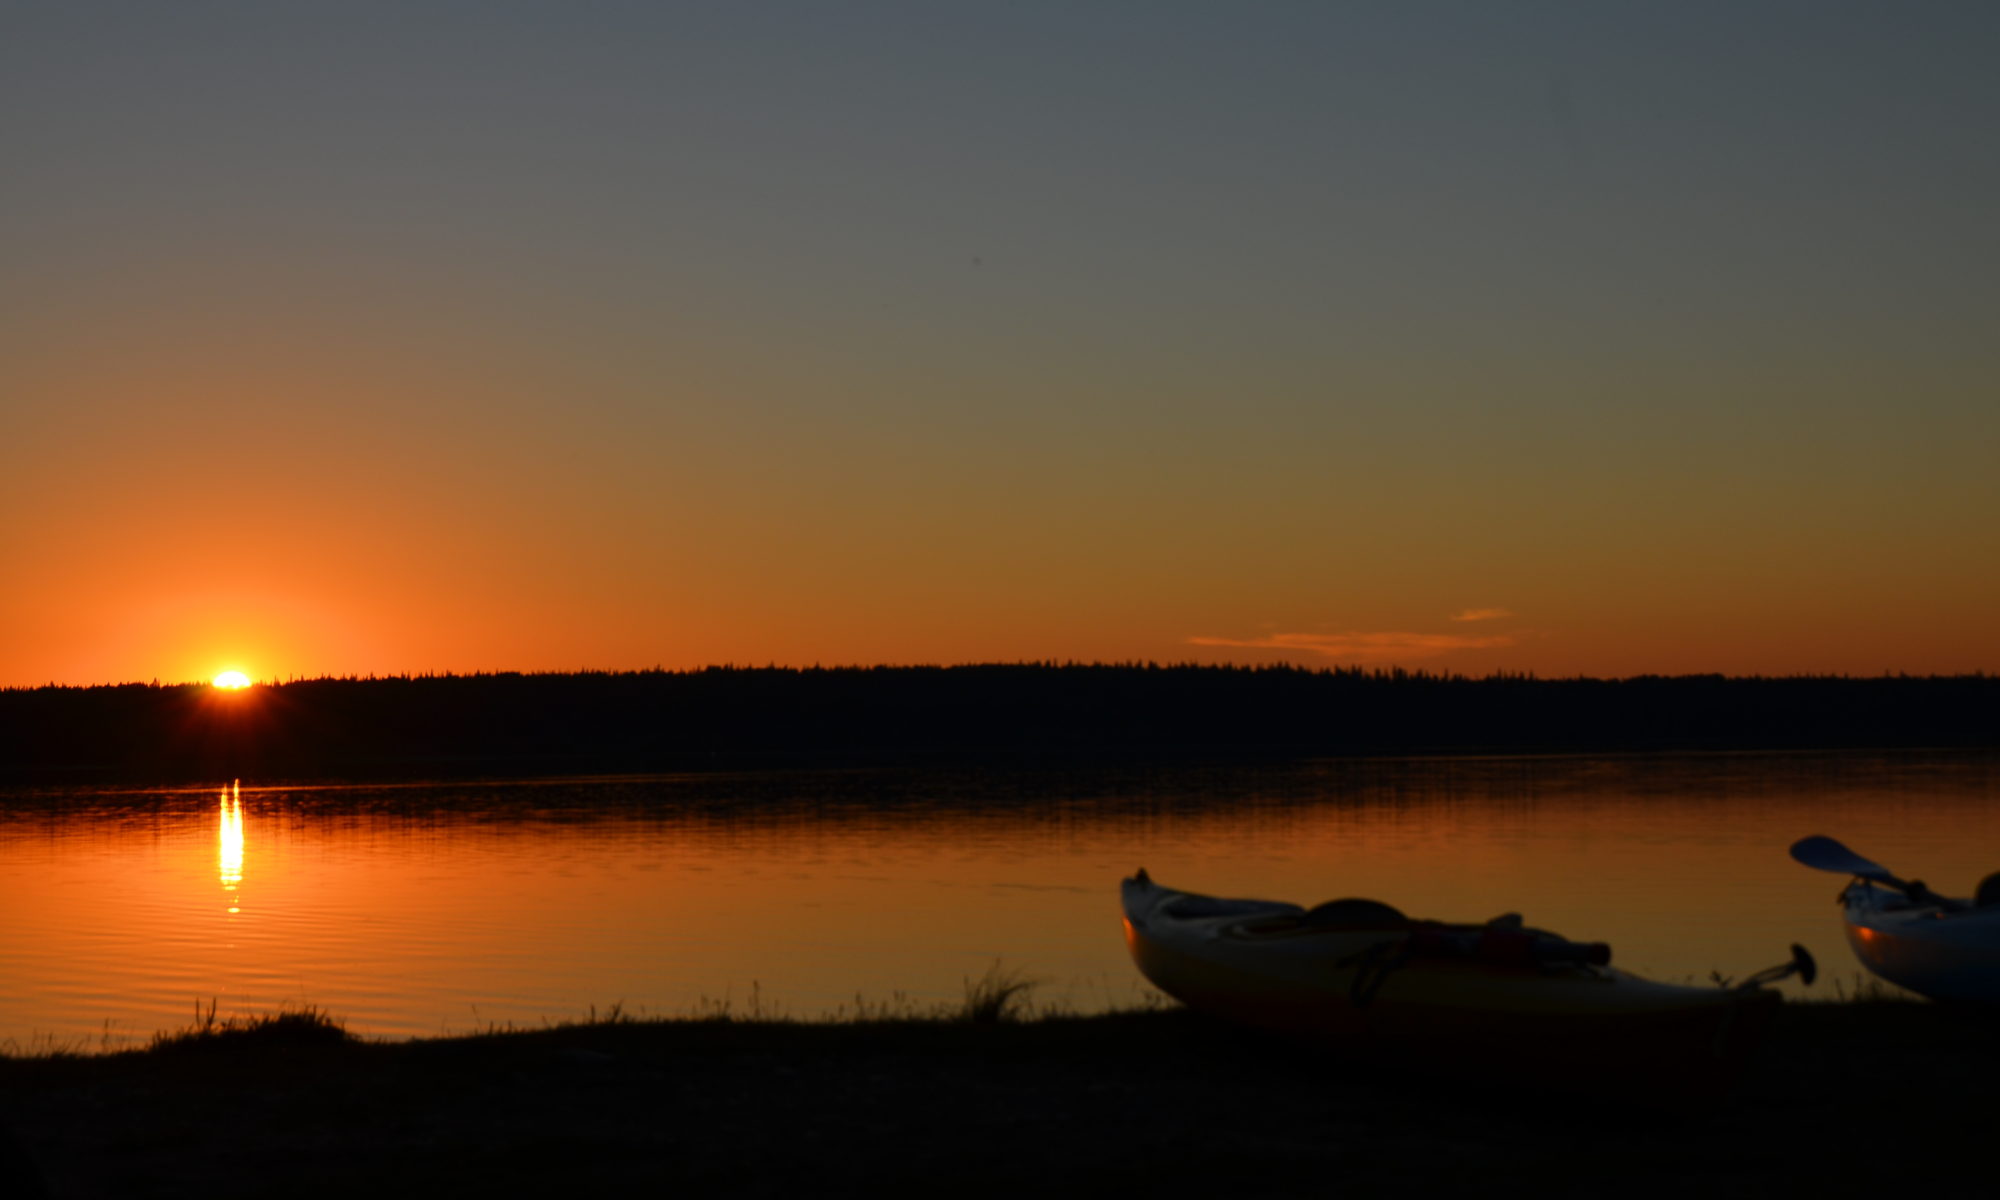 The setting sun reflected in a lake with kayaks in the foreground